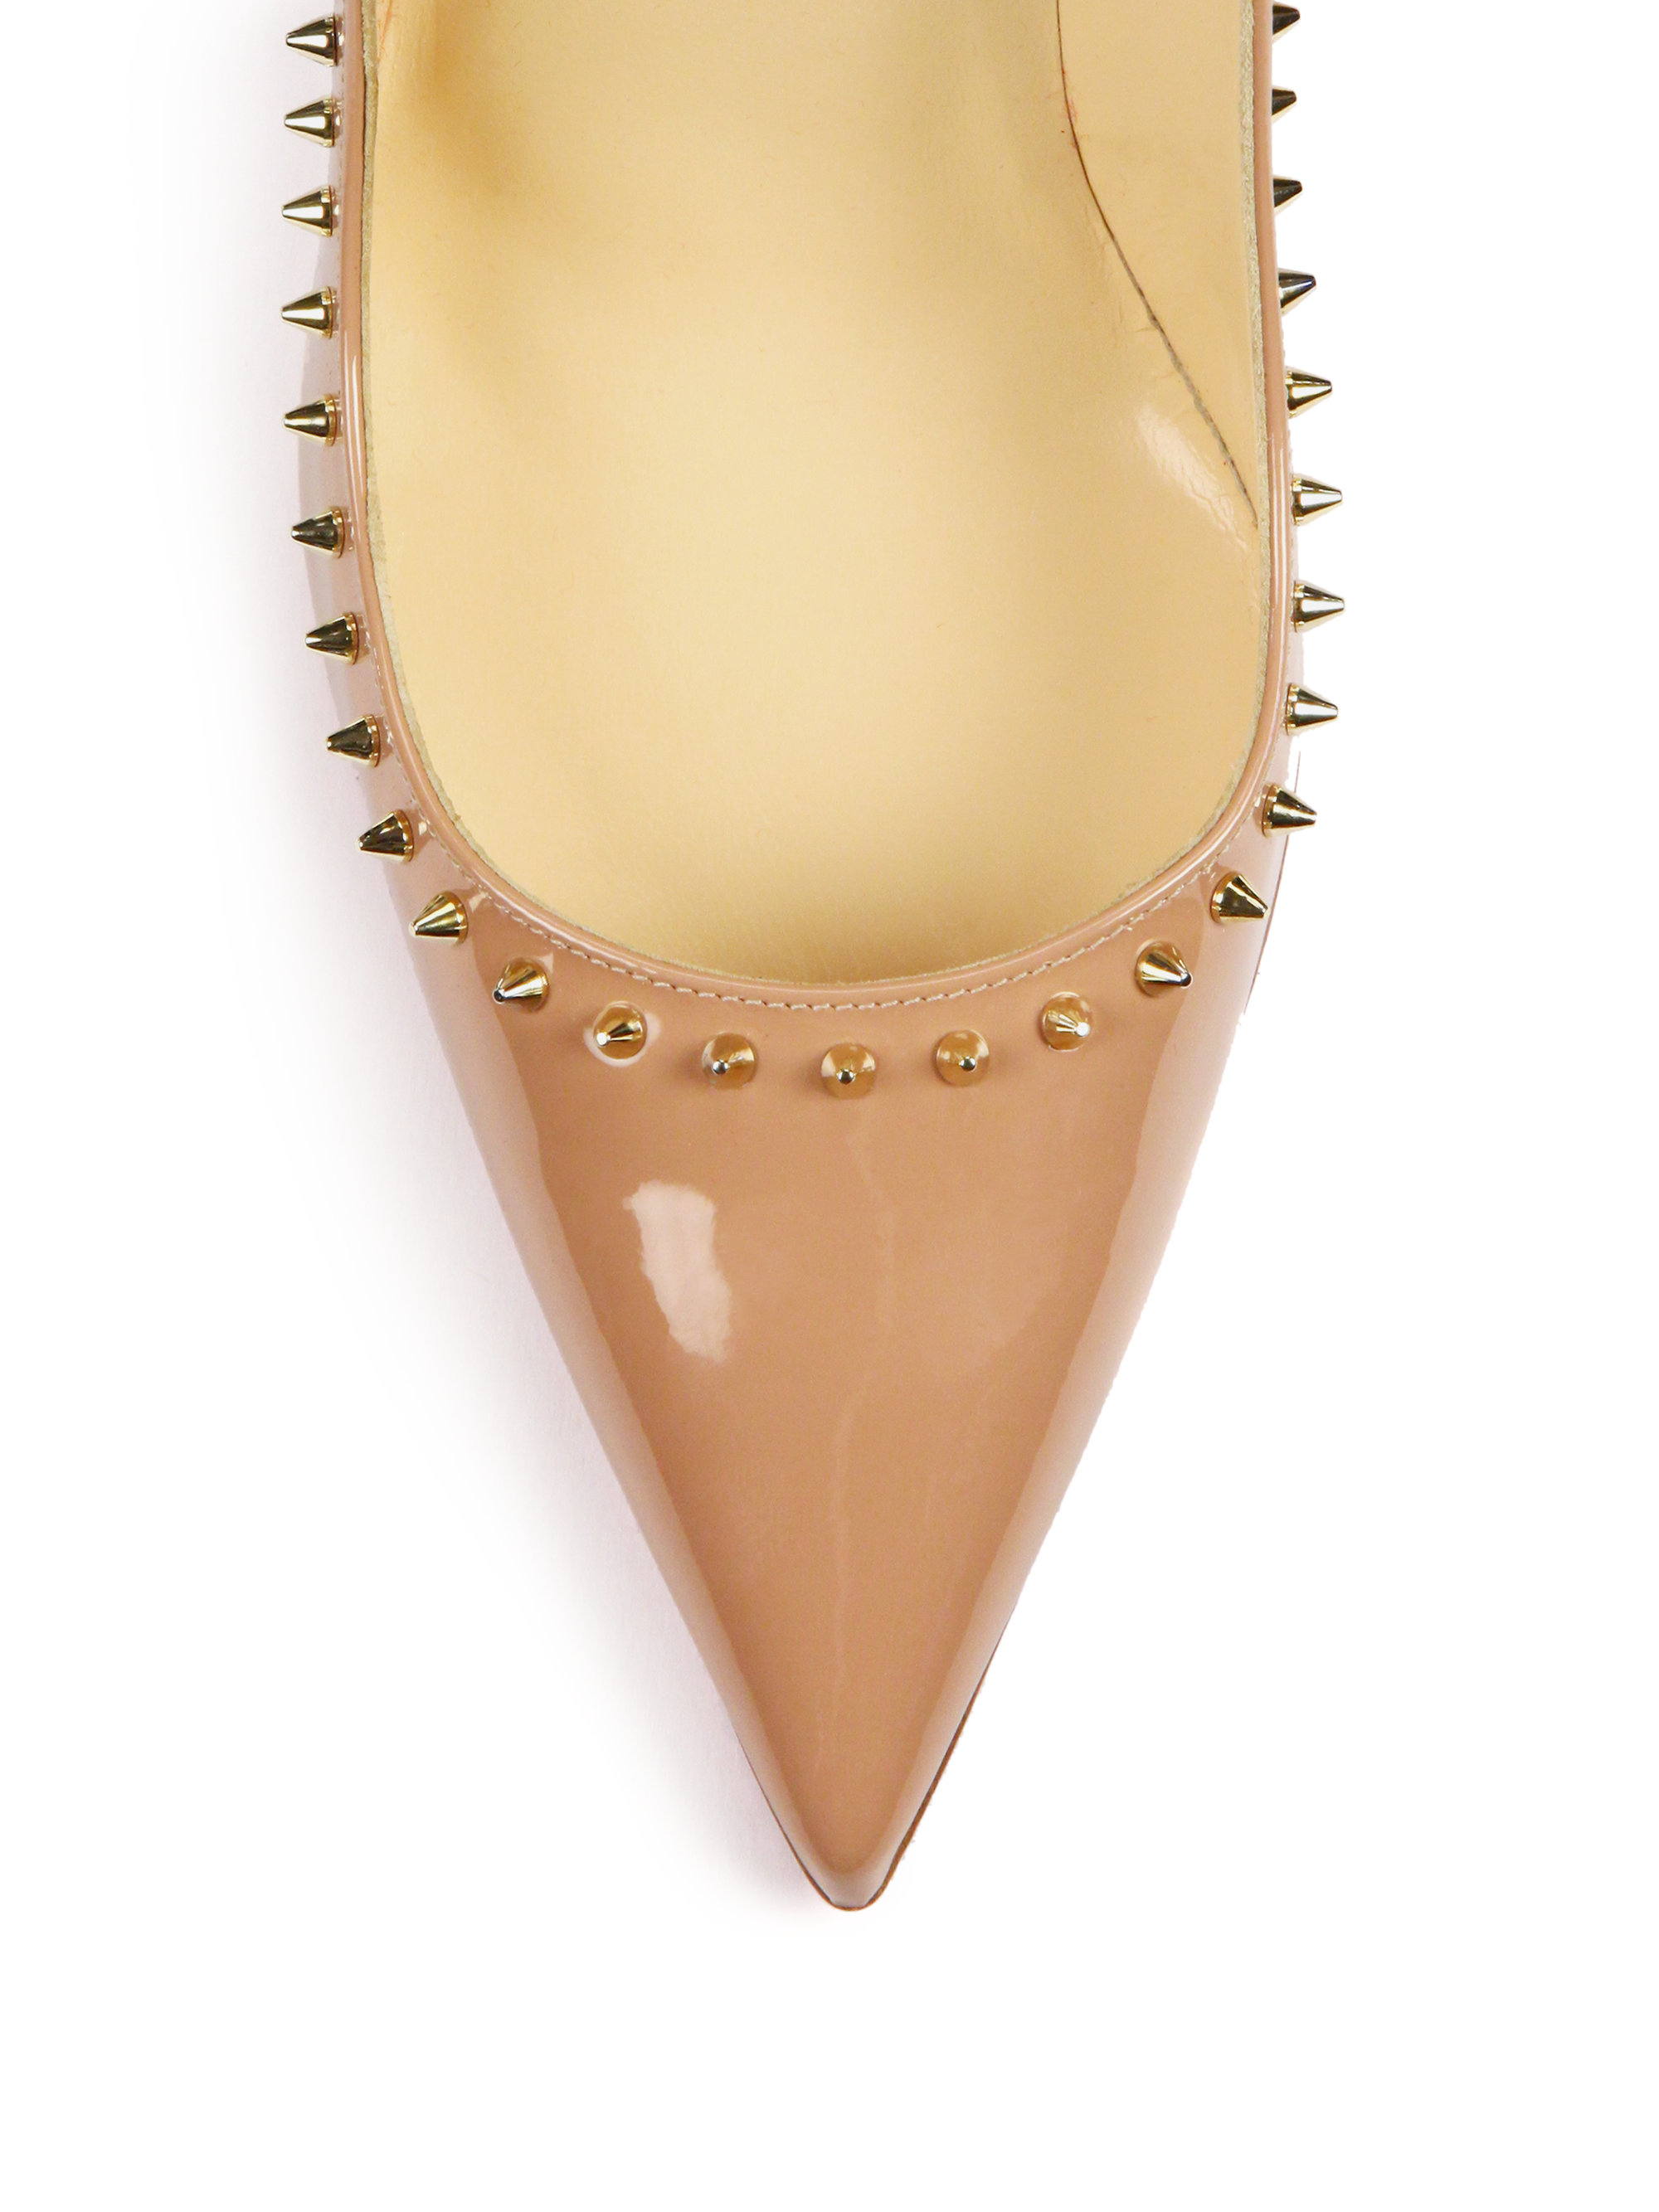 Christian louboutin Anjalina Spiked Patent Leather Pumps in Beige ...  